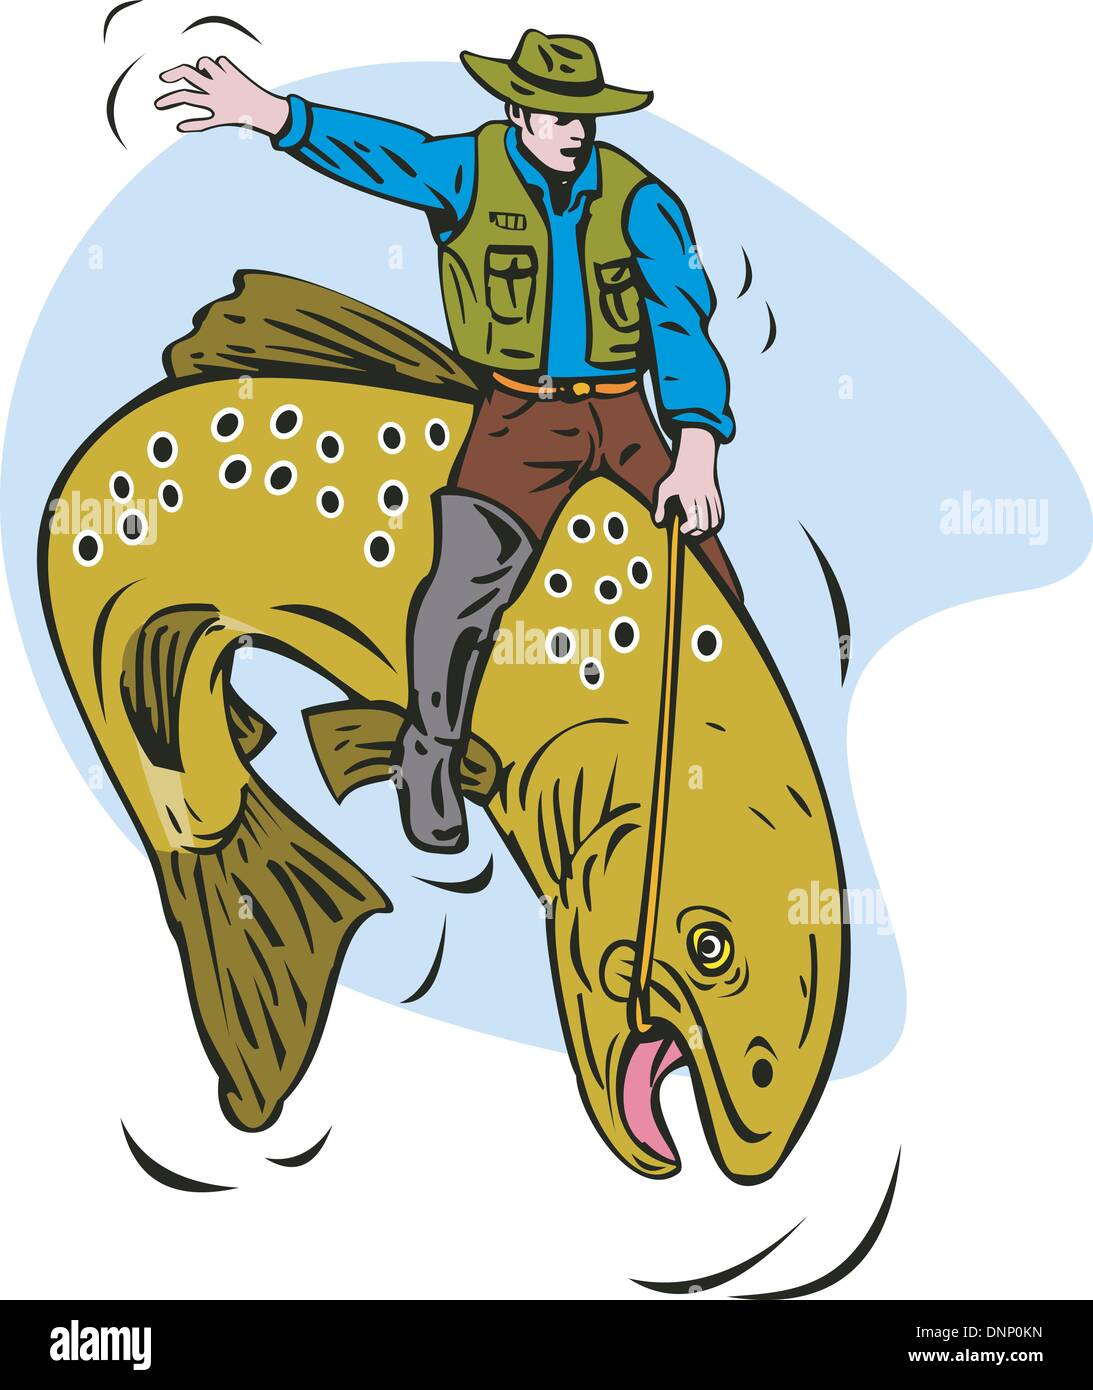 illustration of a trout fish jumping with fly fisherman riding